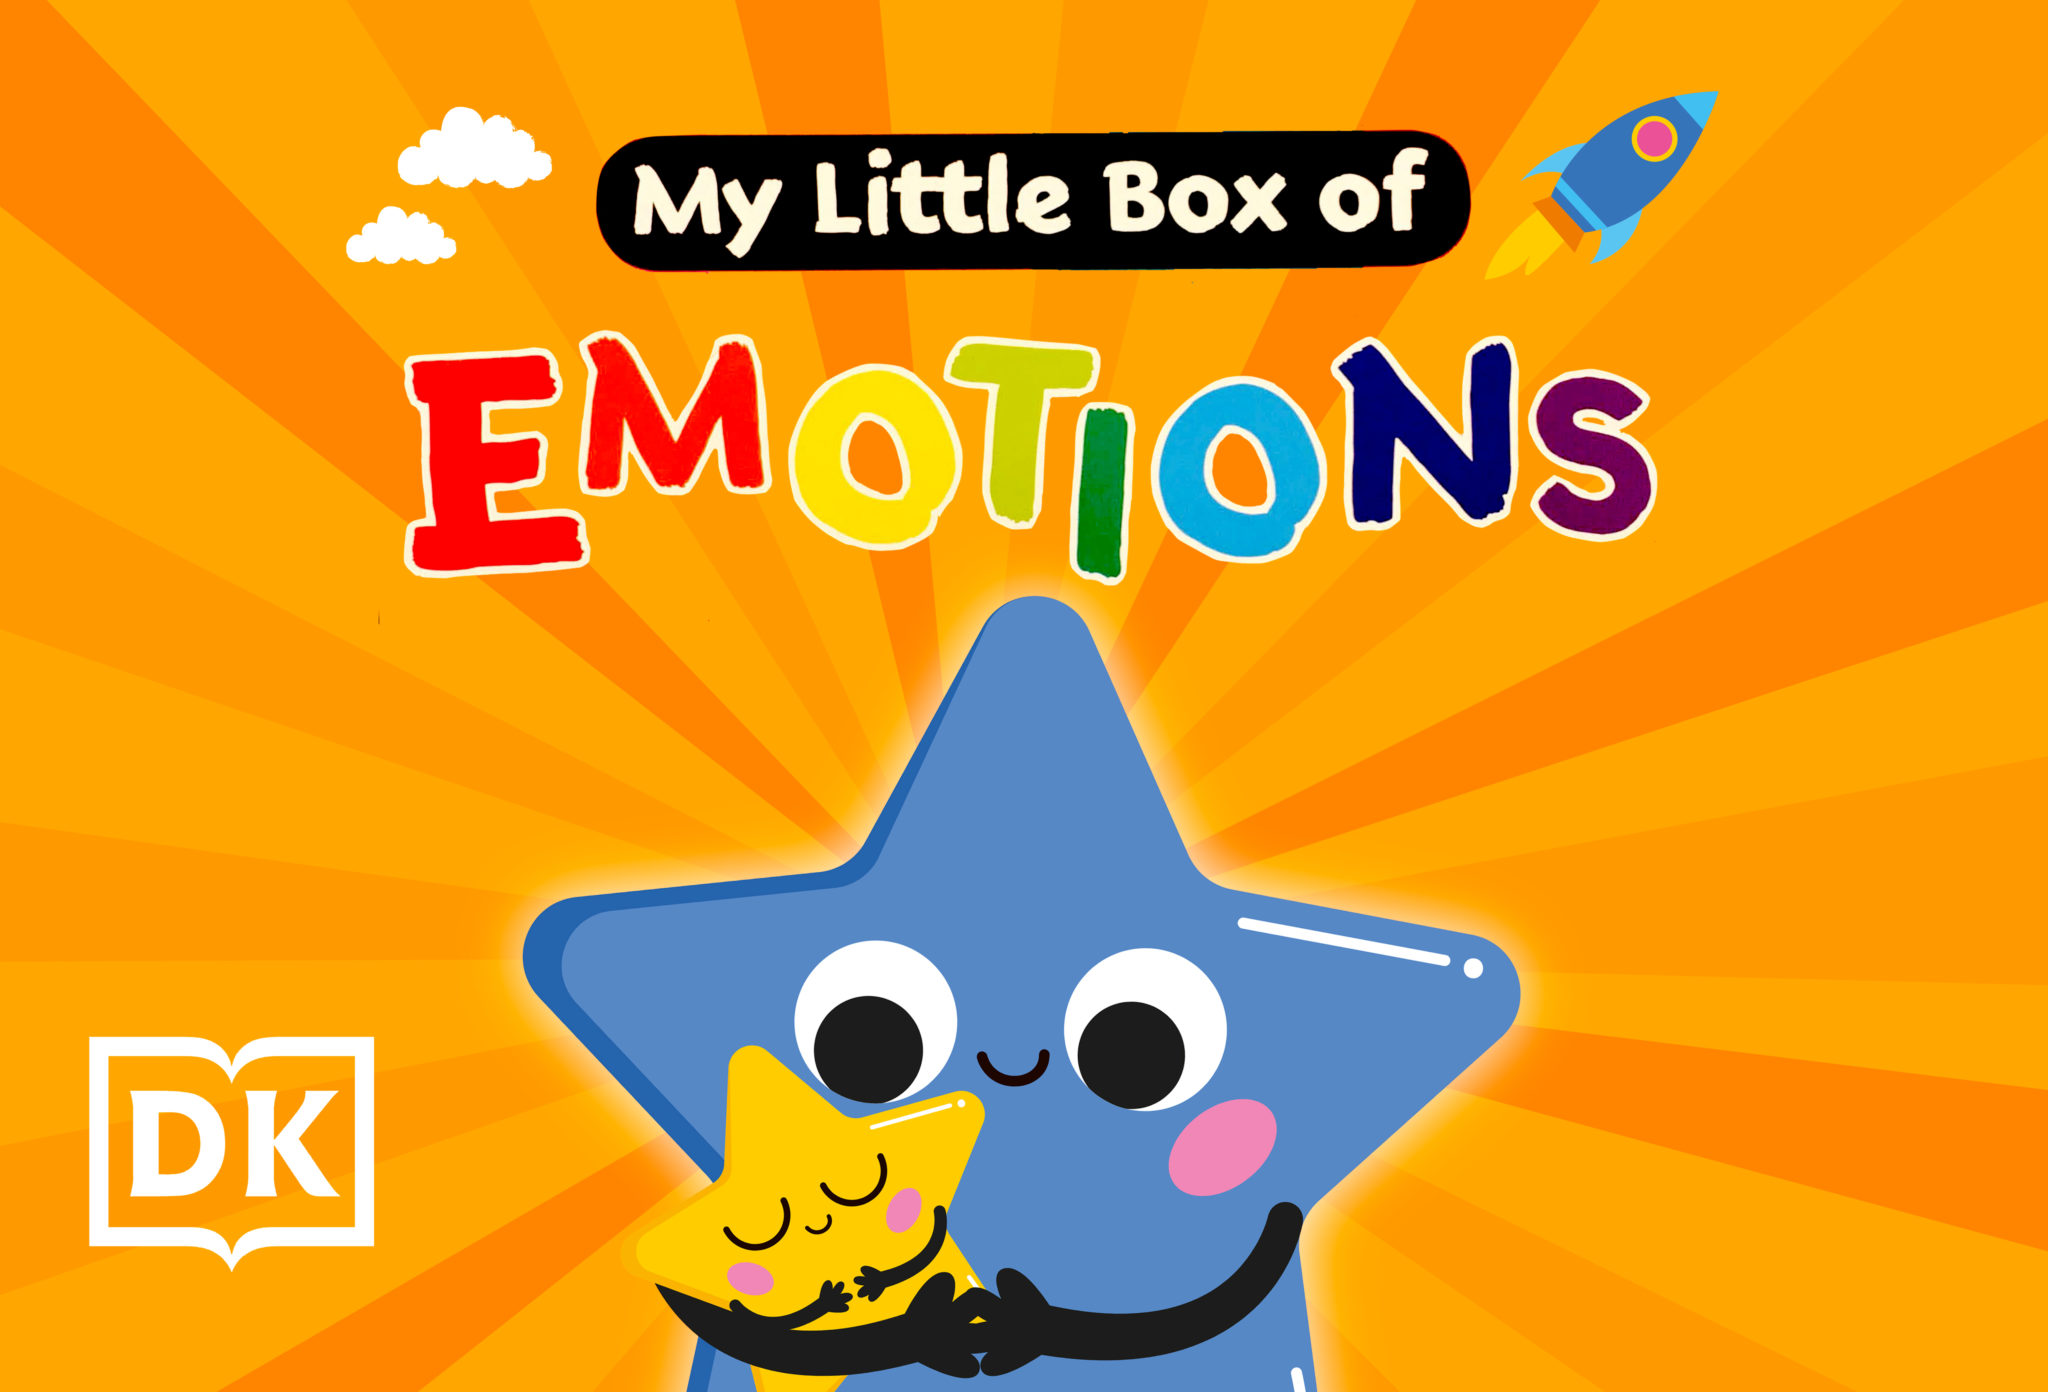 My Little Box of Emotions